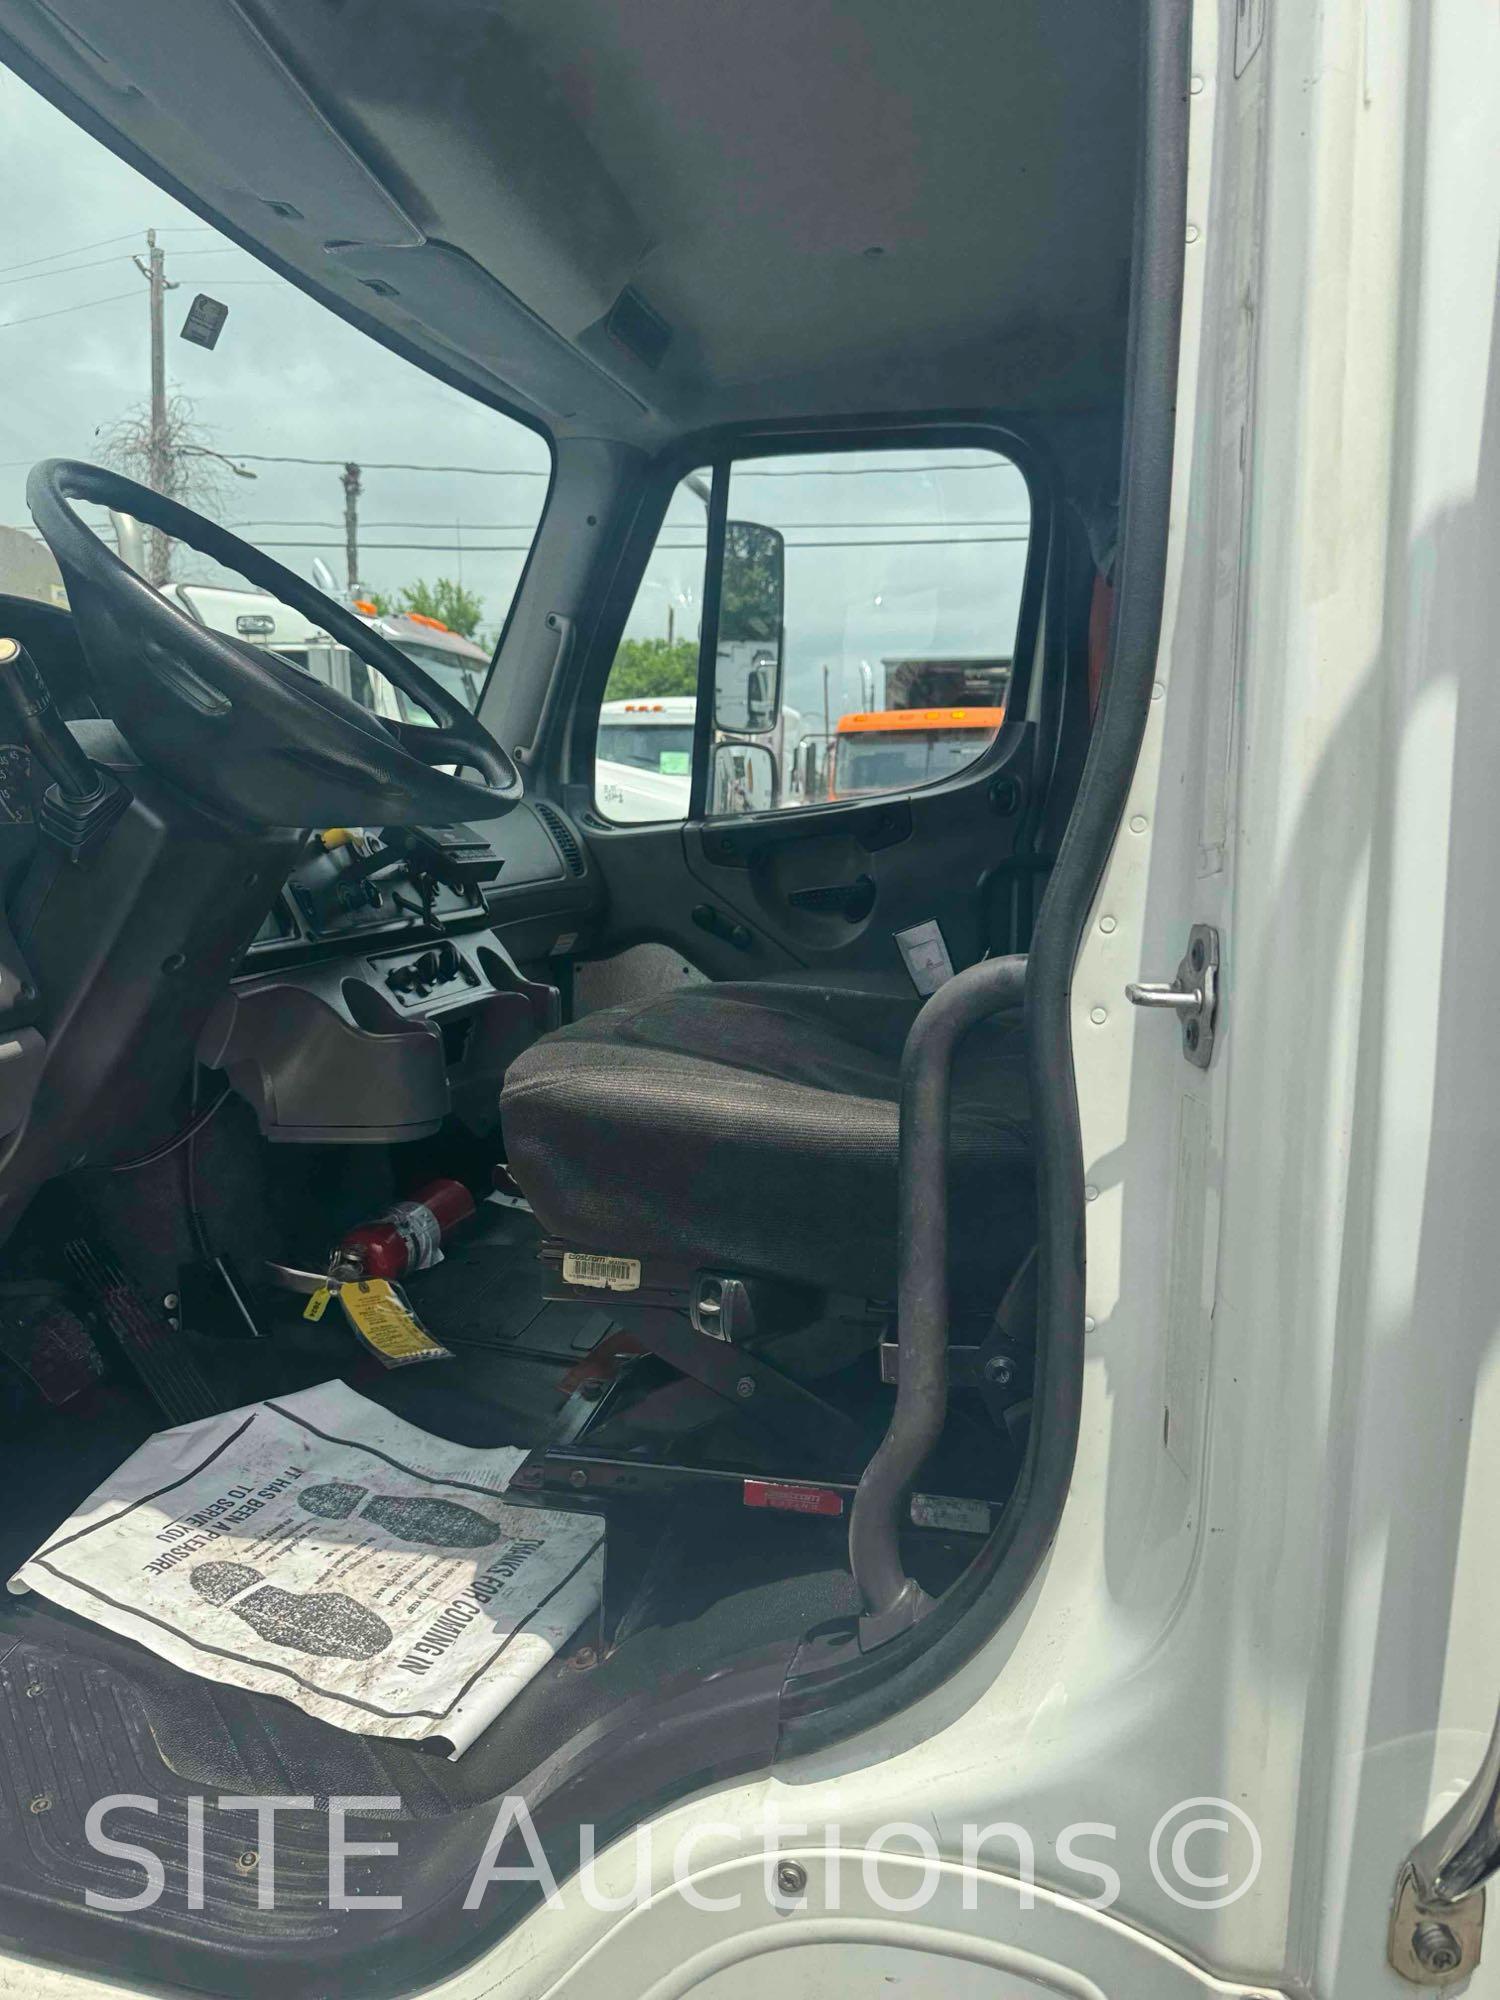 2012 Freightliner M2 Business S/A Reefer Truck